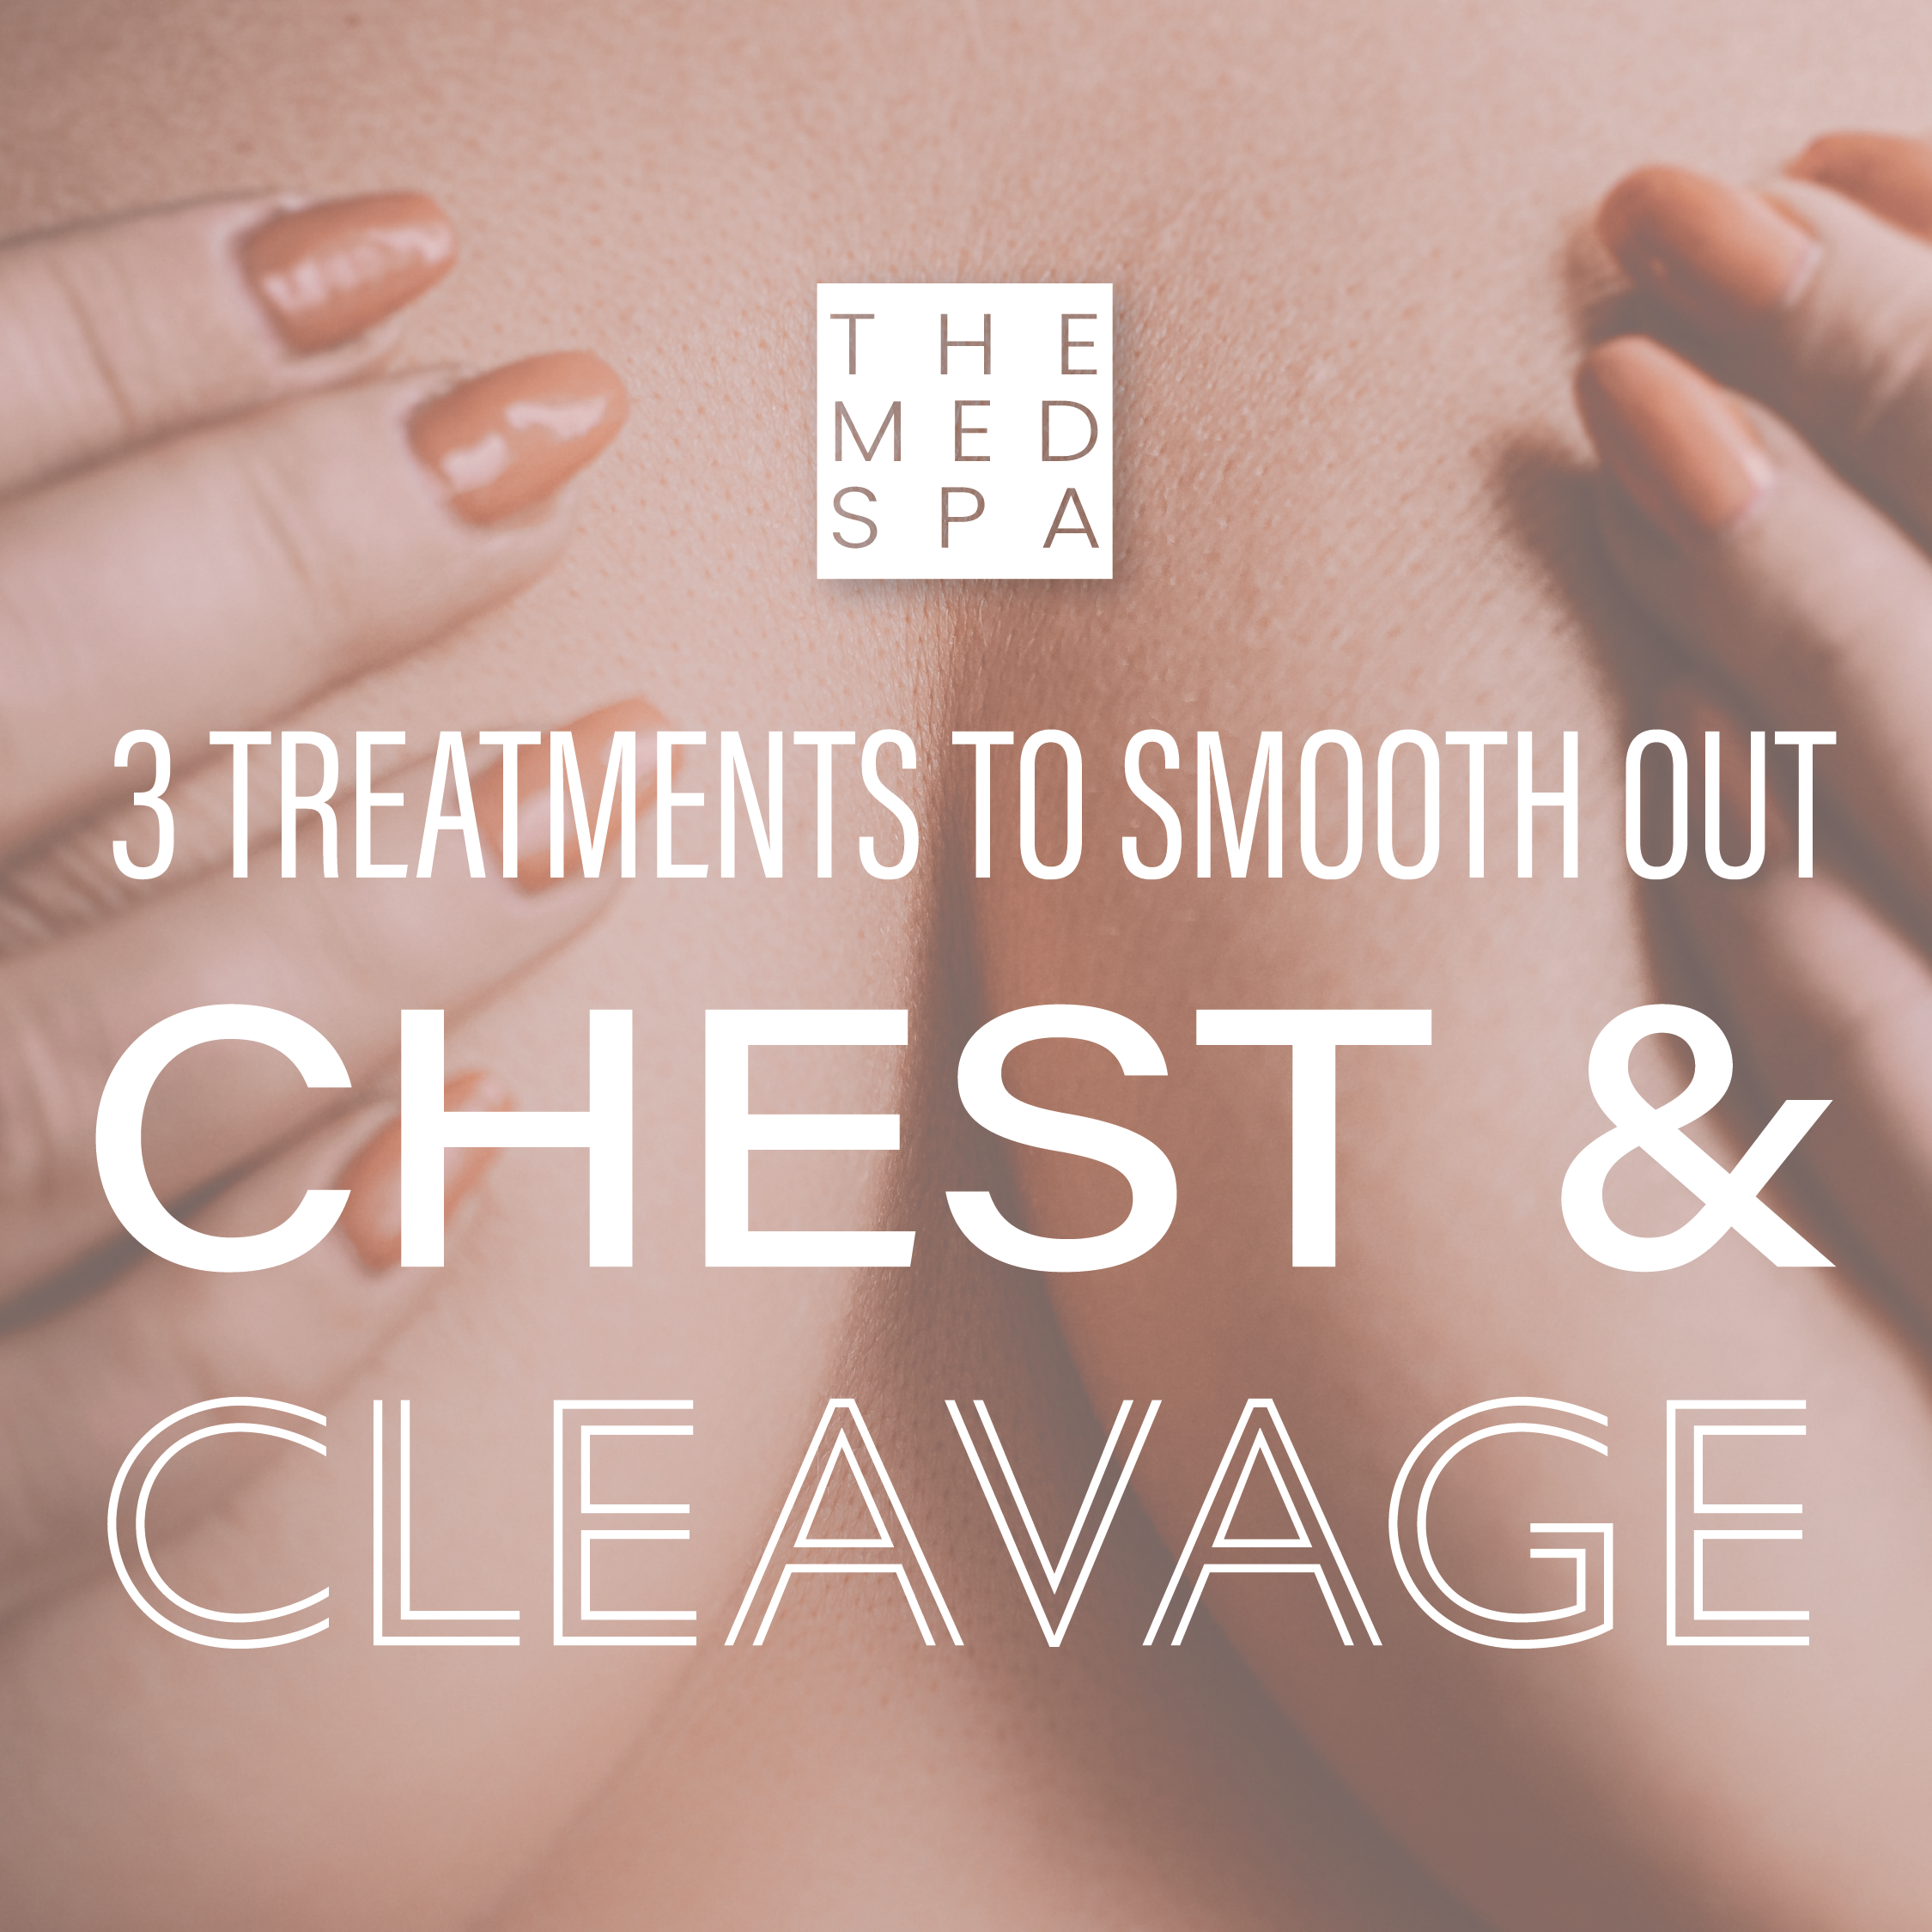 Smooth Out Chest and Cleavage Wrinkles with These 3 Treatments